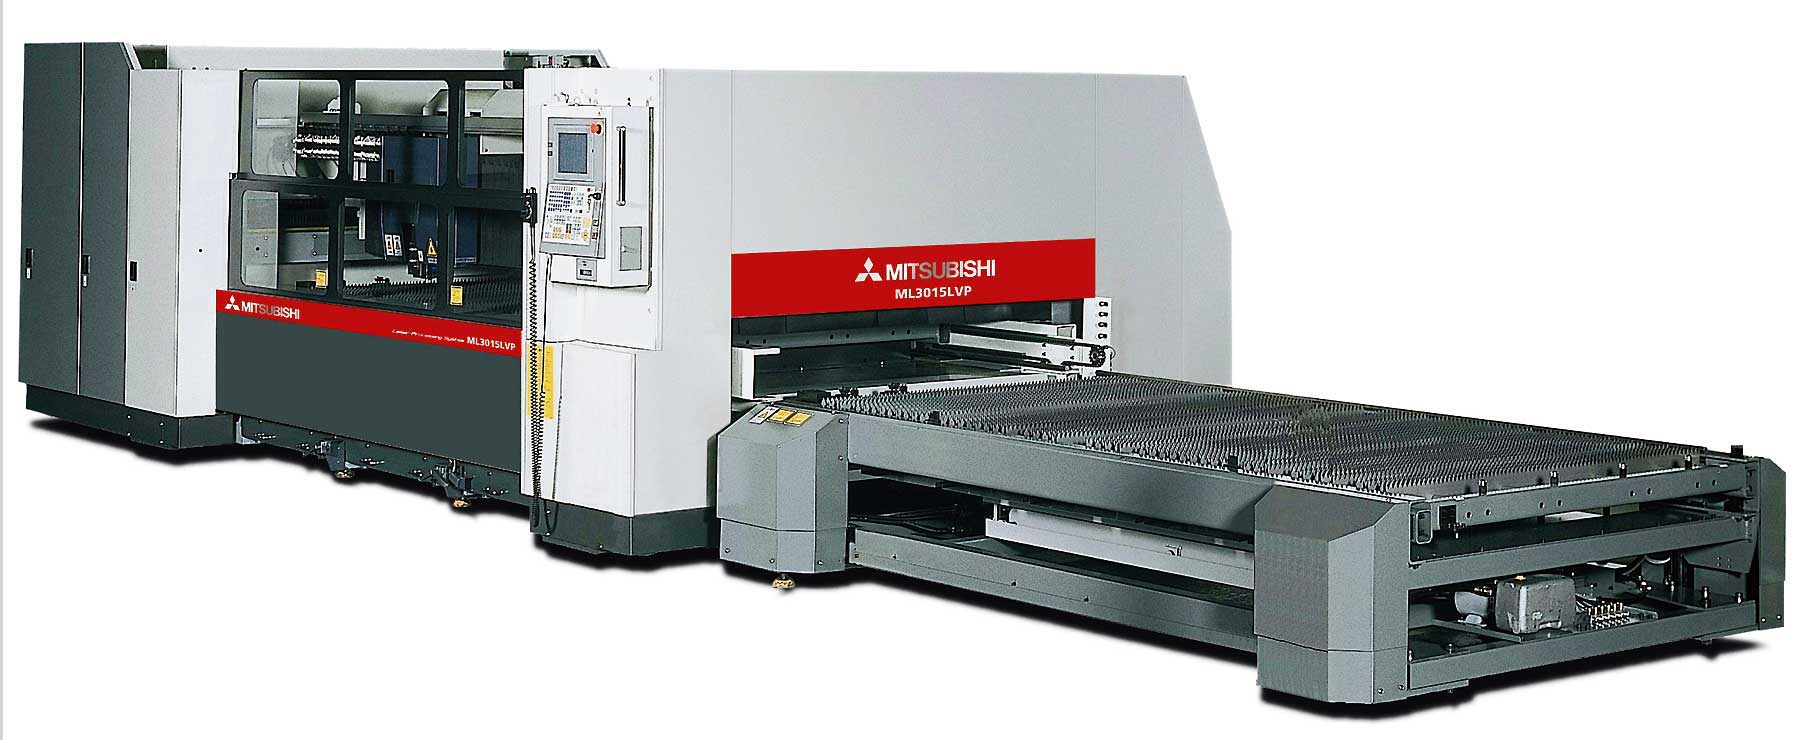 The ML3015LVP laser-cutting system serves a machining range of 3,100 x 1,550 mm. 